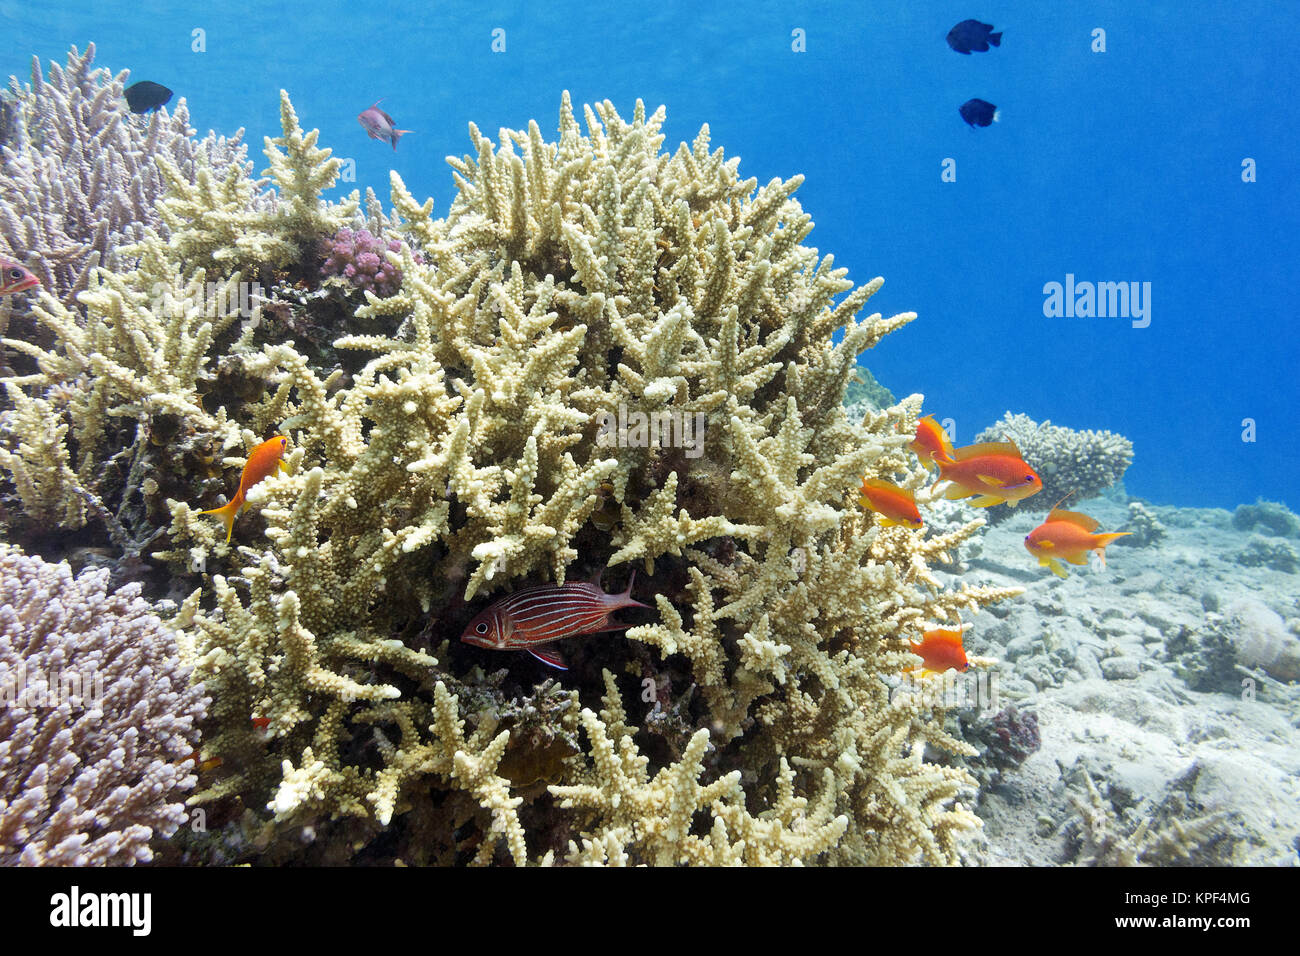 coral reef with hard corals and fishes athias in tropical sea ...